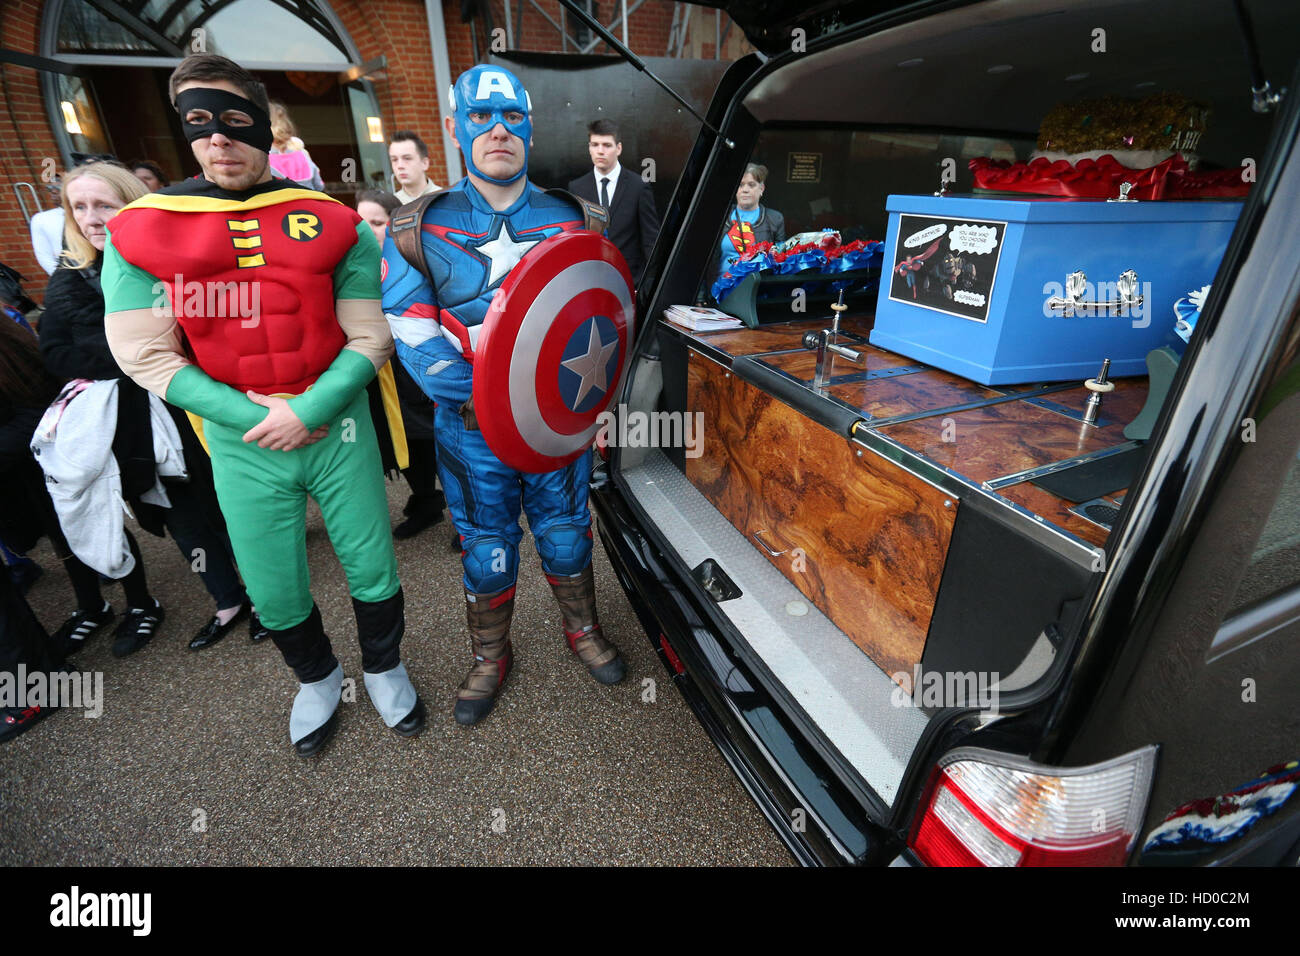 Pallbearers dressed as superheroes wait by the hearse containing the coffin of 18-year-old Arthur Peebles before his funeral at North East Surrey Crematorium in Morden, conducted by Co-op Funeralcare. Stock Photo